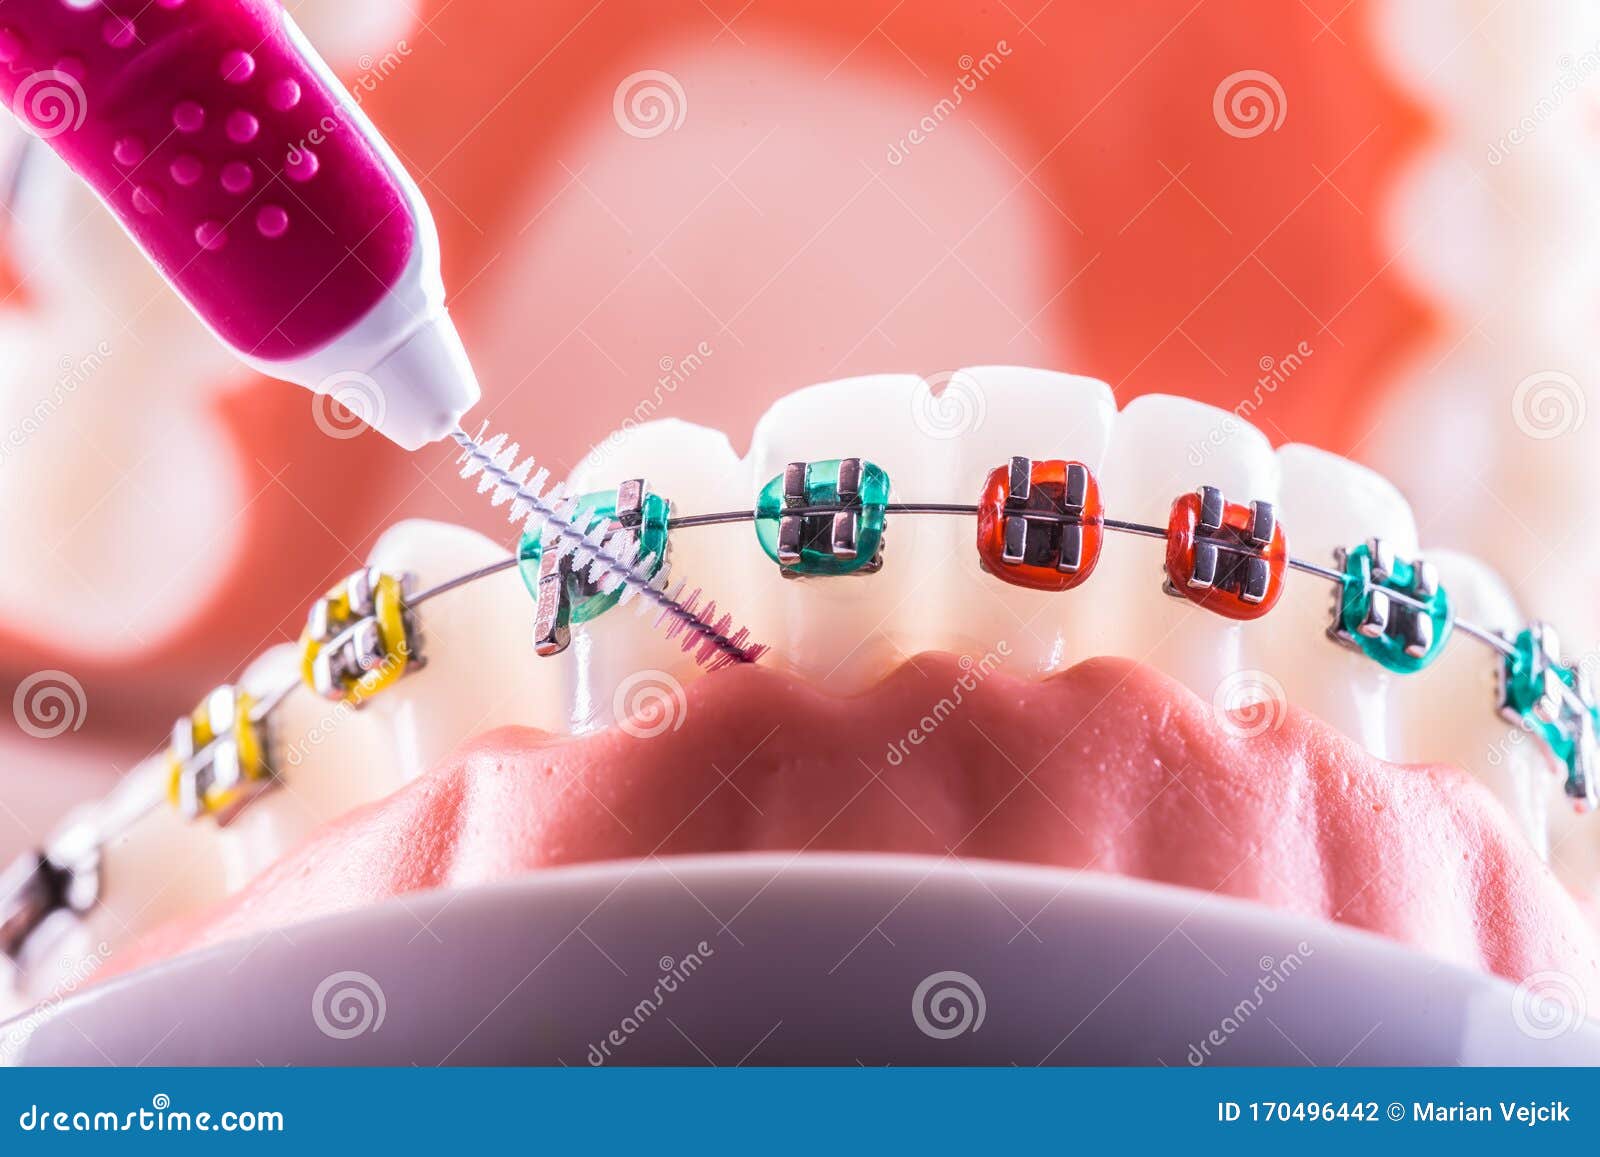 tooth model from dental braces with inter dental teeth cleaning brush